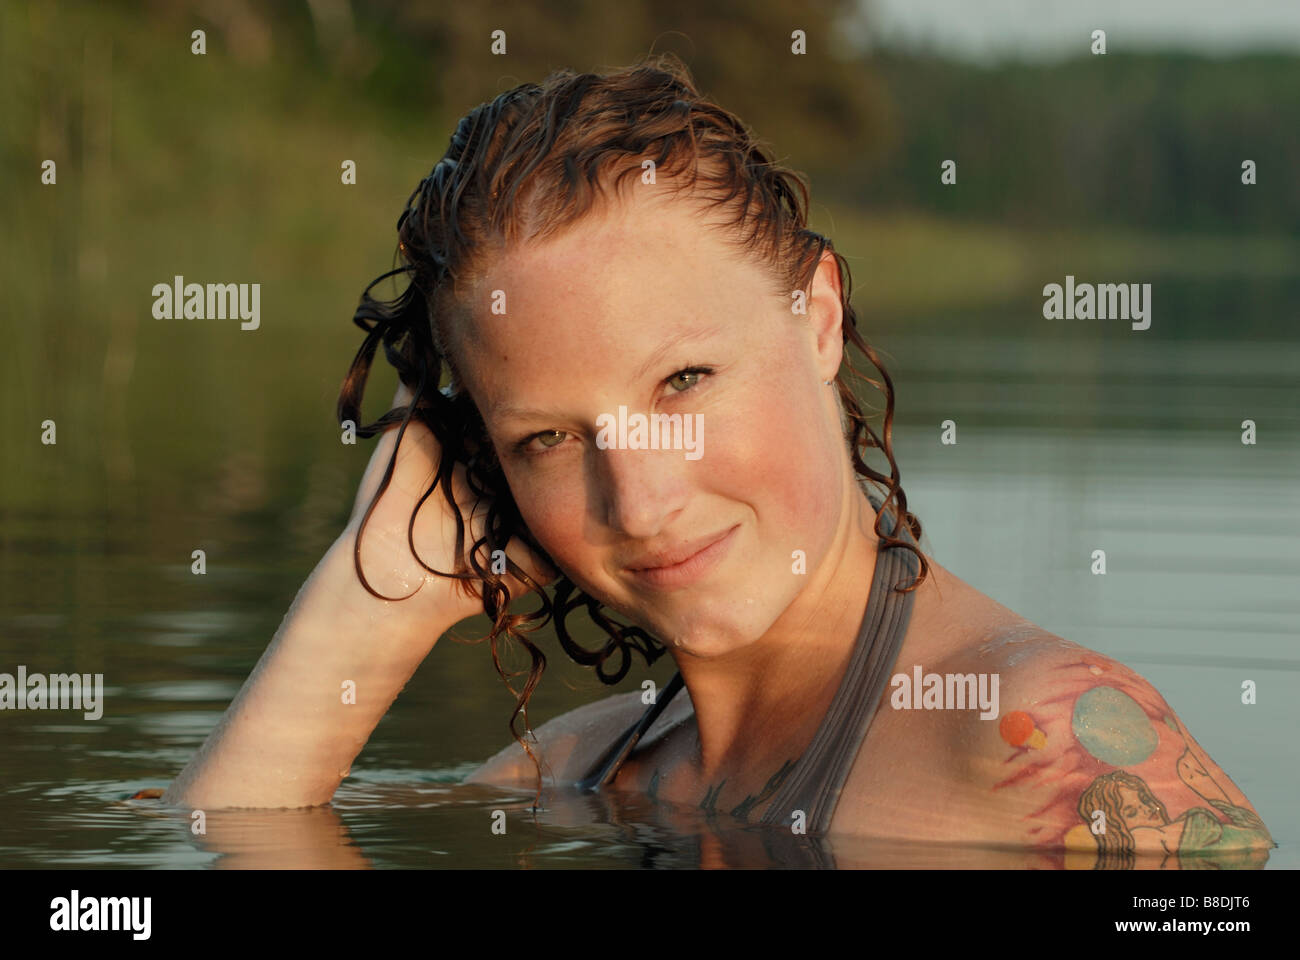 Woman with hand to wet head in lake, Lake Katherine, Riding Mountain National Park, Manitoba, Canada Stock Photo